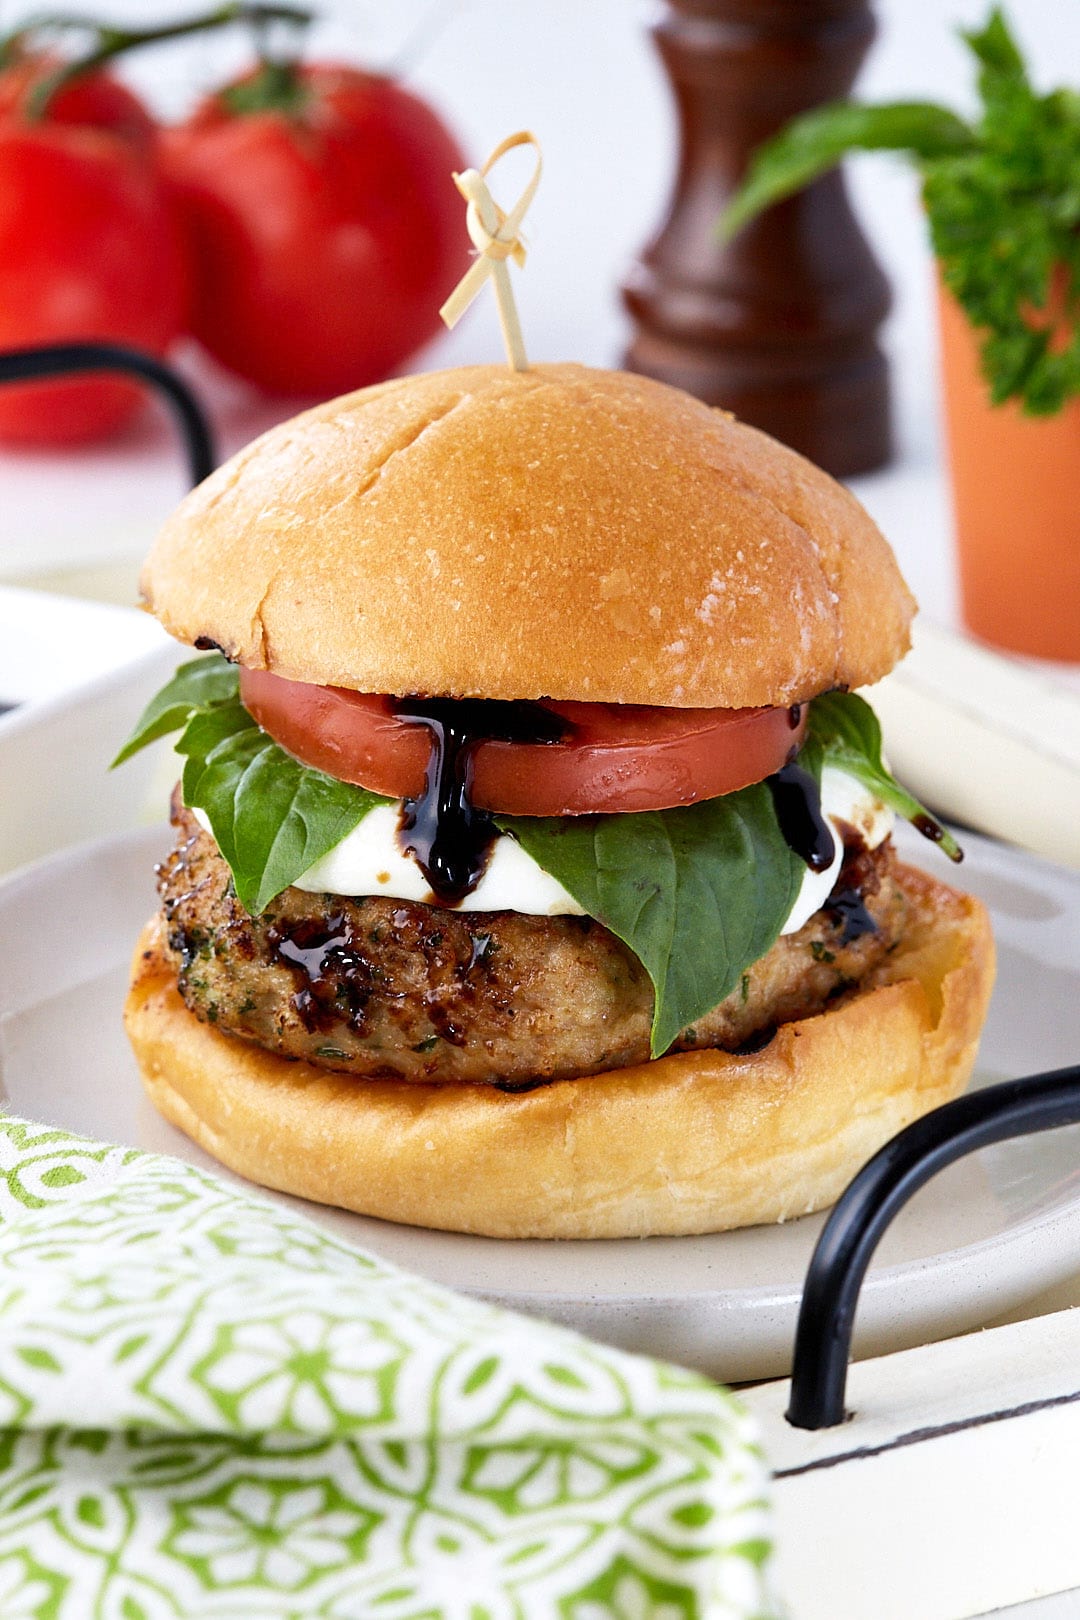 Thick juicy veal burgers served on a fresh bun with thick mozzarella, basil, tomato, and balsamic glaze.